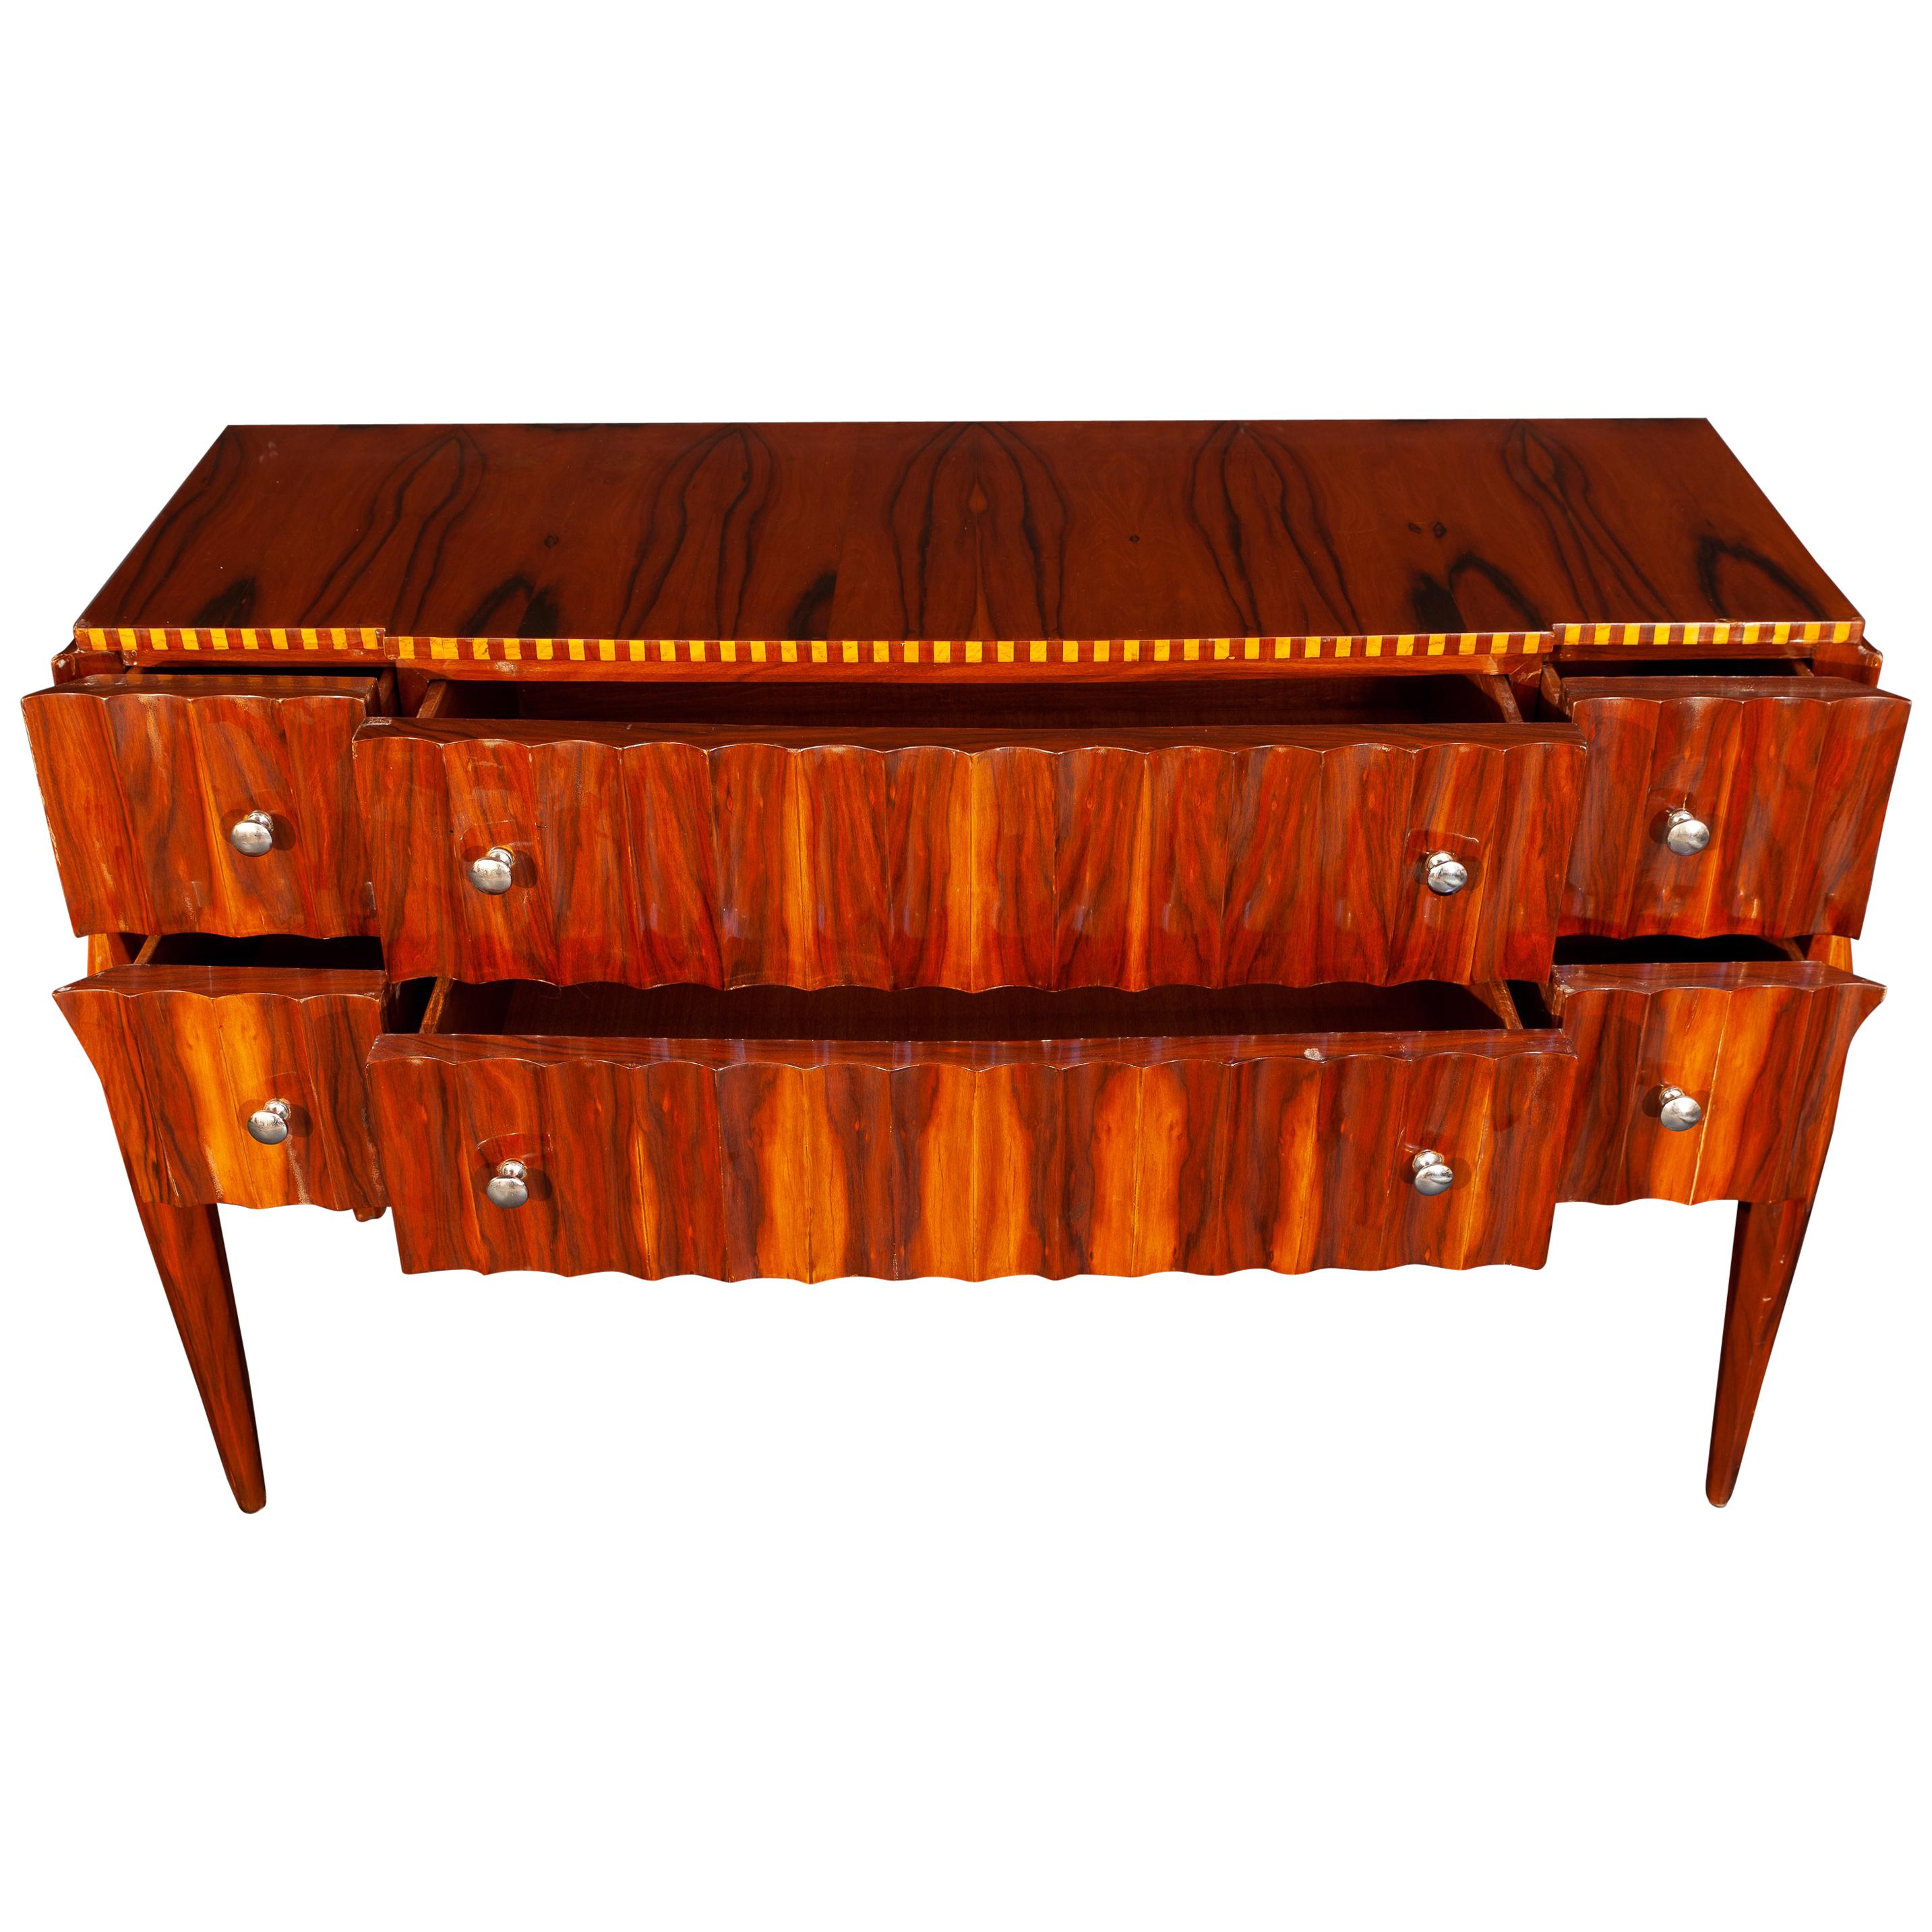 French Art Deco Chest of Drawer or Commode, 1930